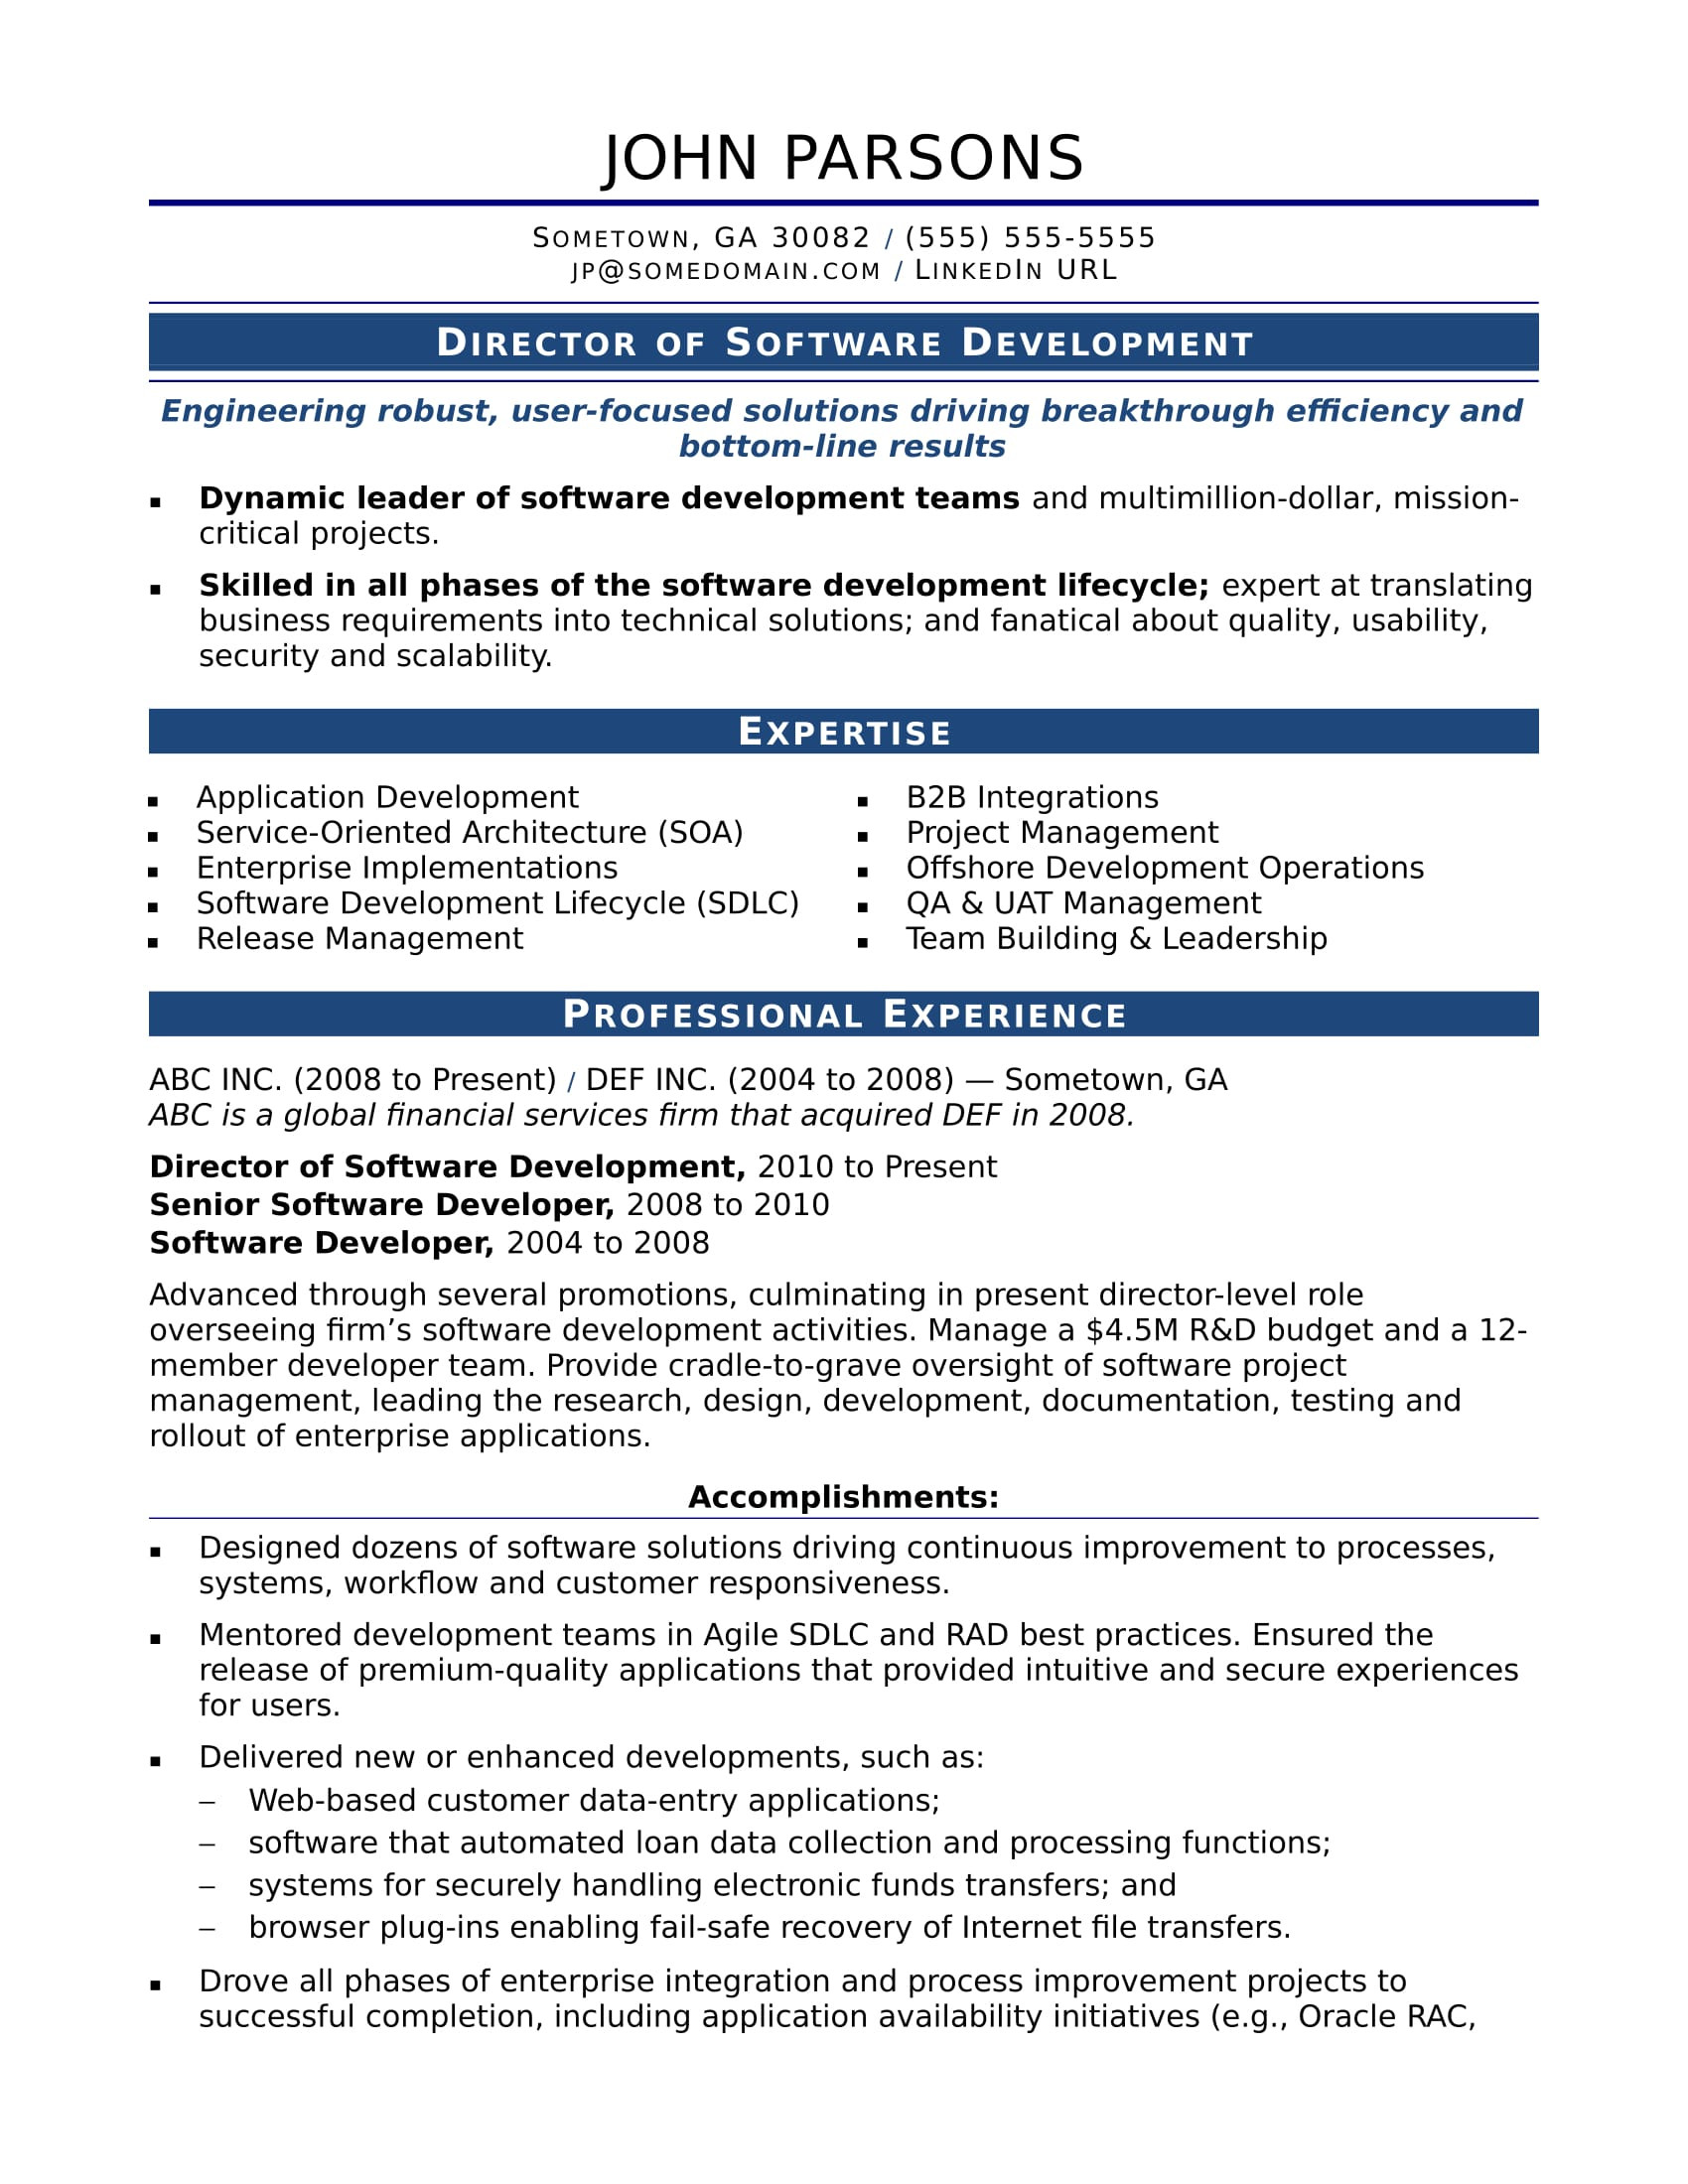 Resume Sample for An It Professional Sample Resume for An Experienced It Developer Monster.com